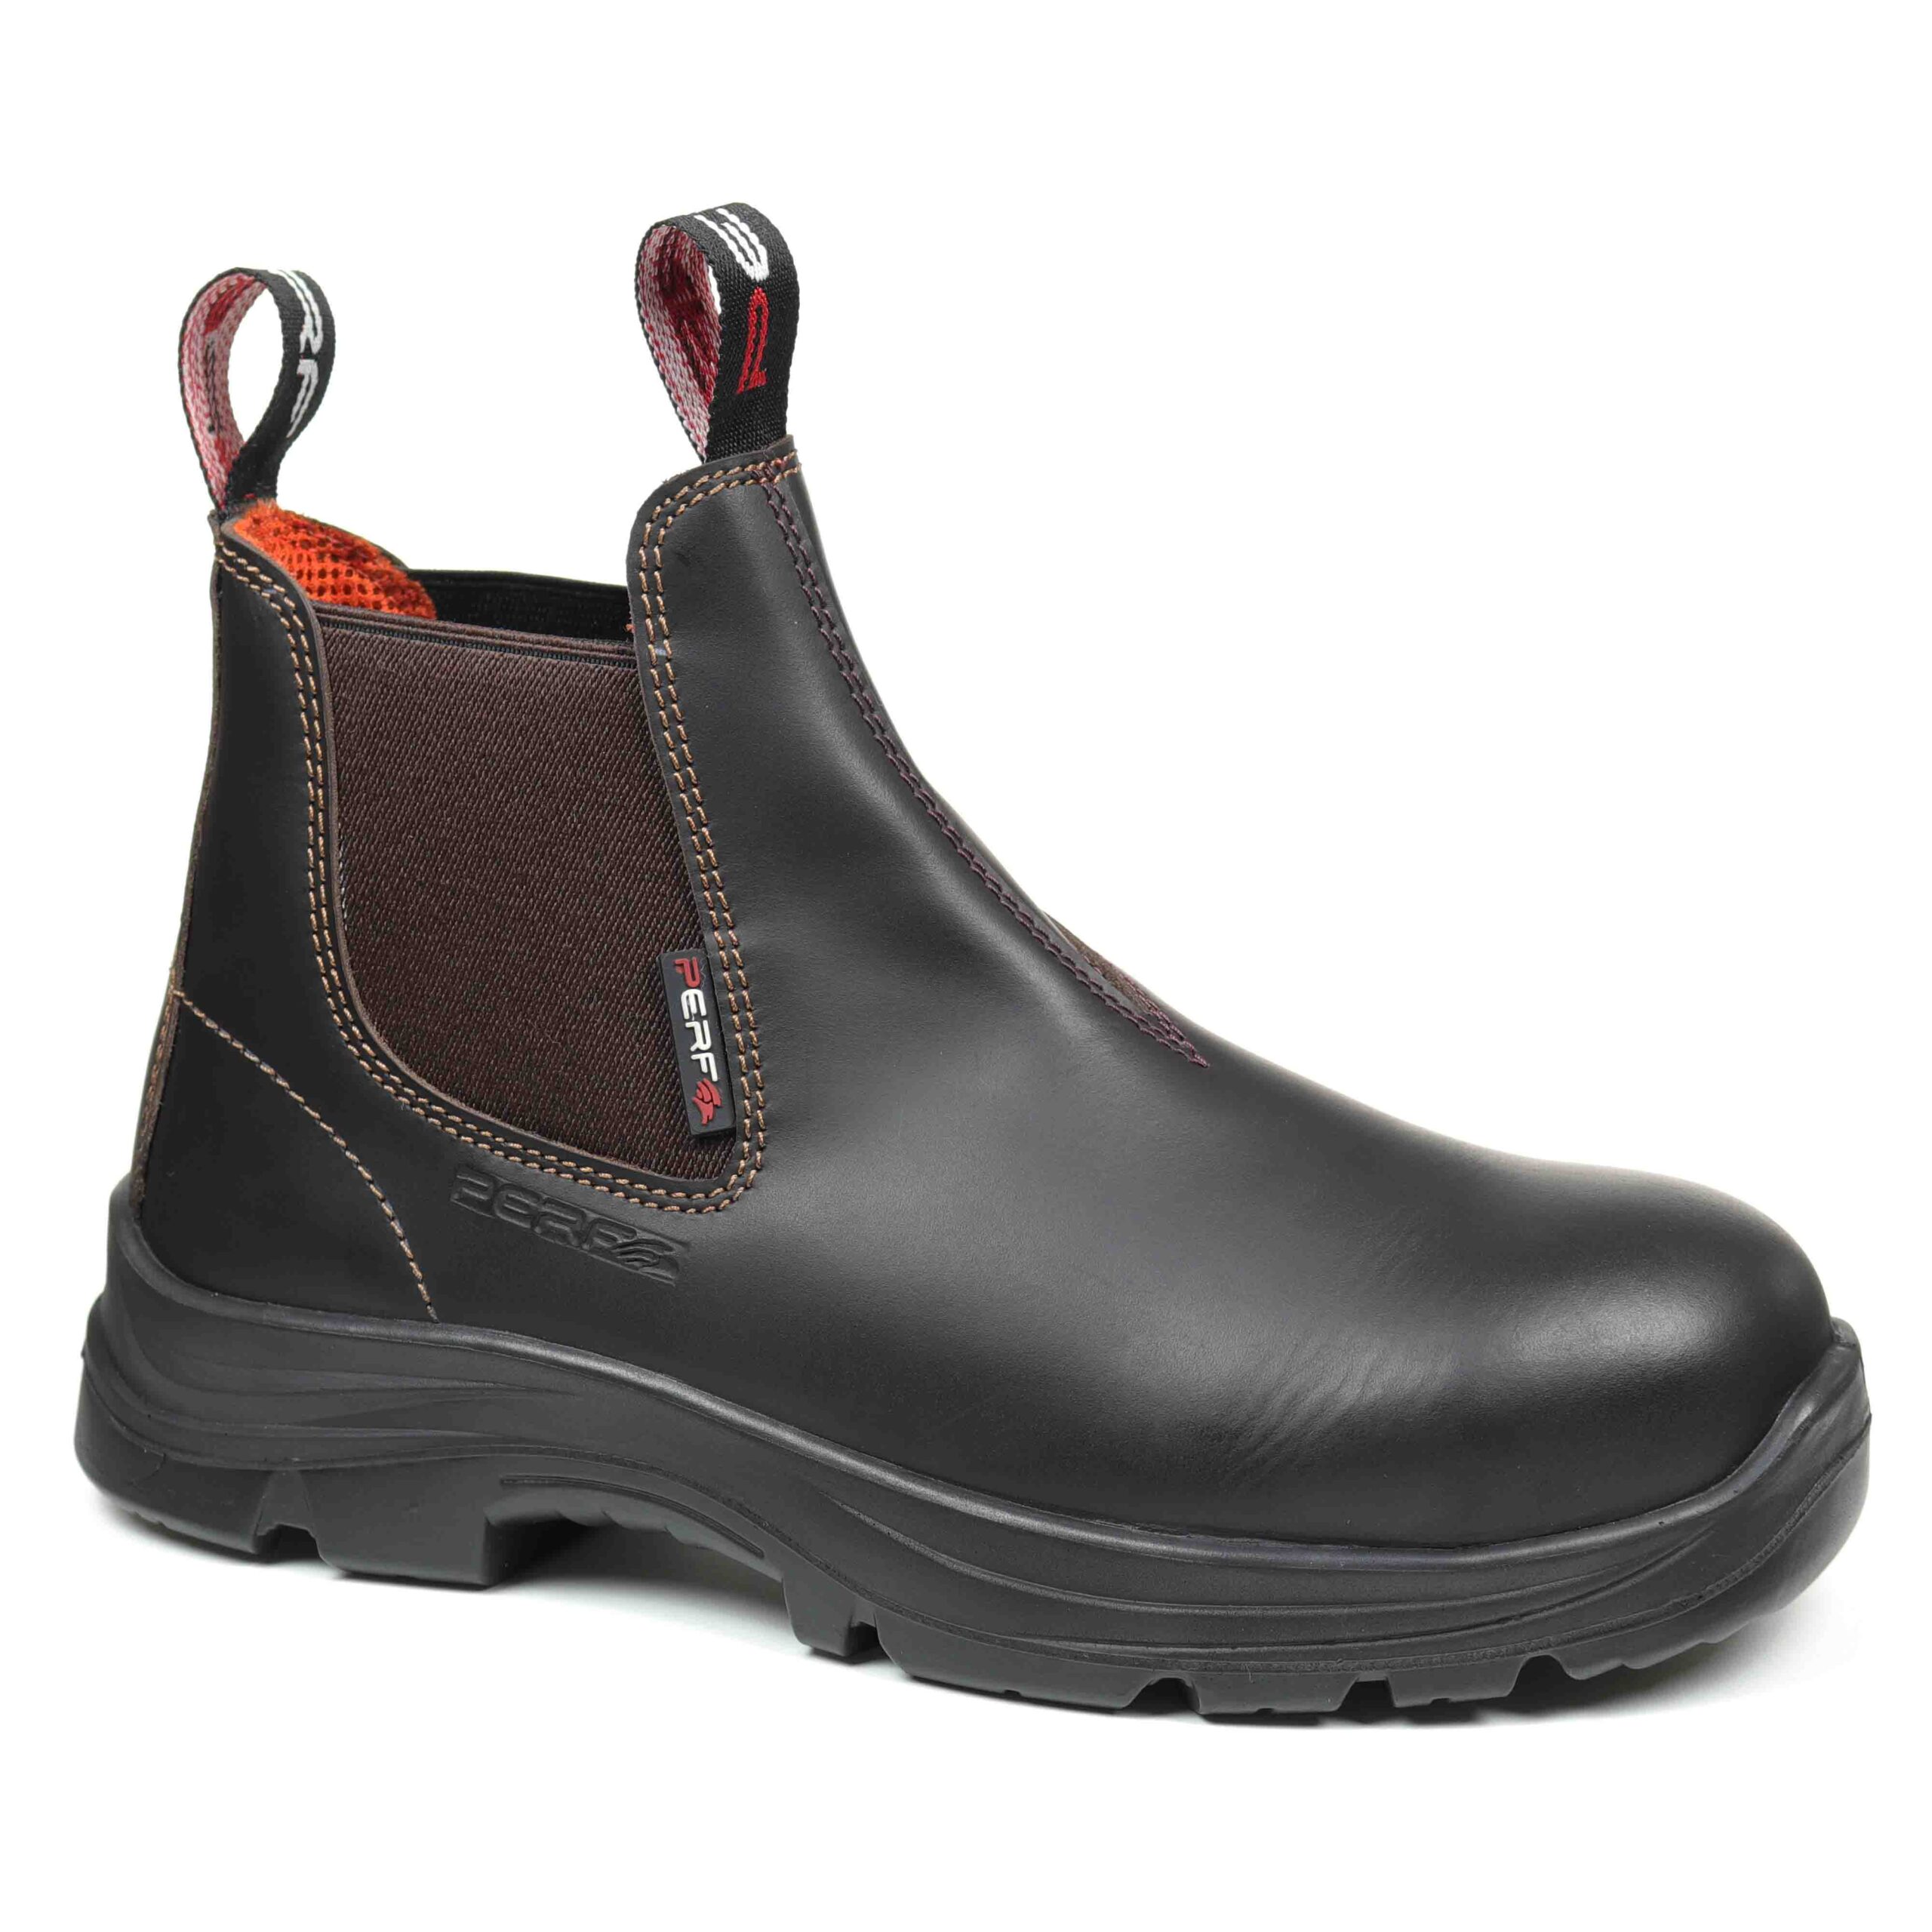 Brandon Pro Dealer Boots – CR Safety Consumables